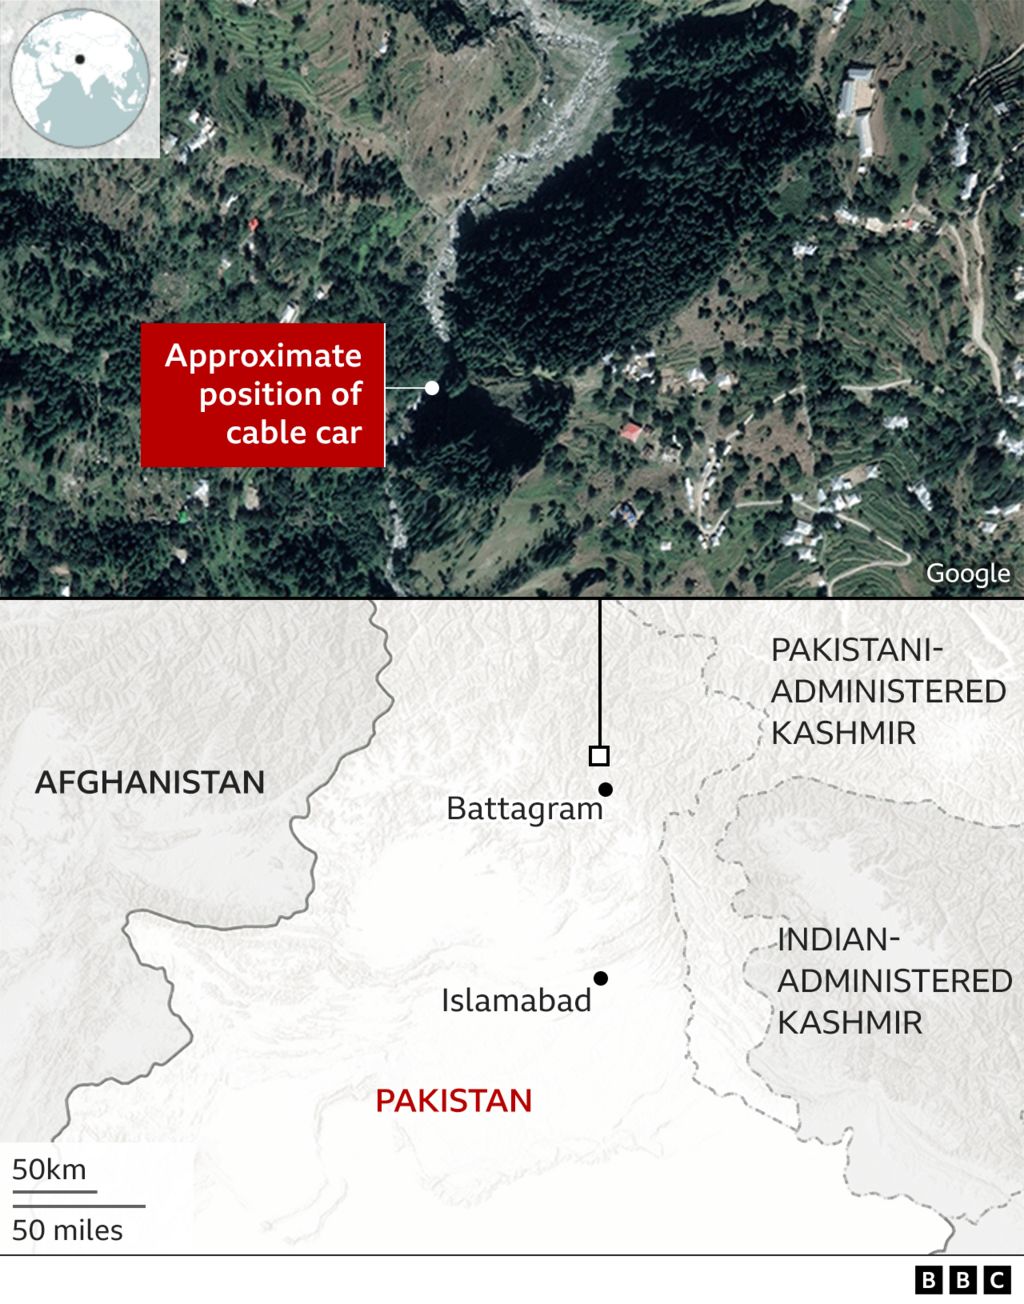 Map of surrounding area of where cable car is stuck in Pakistan